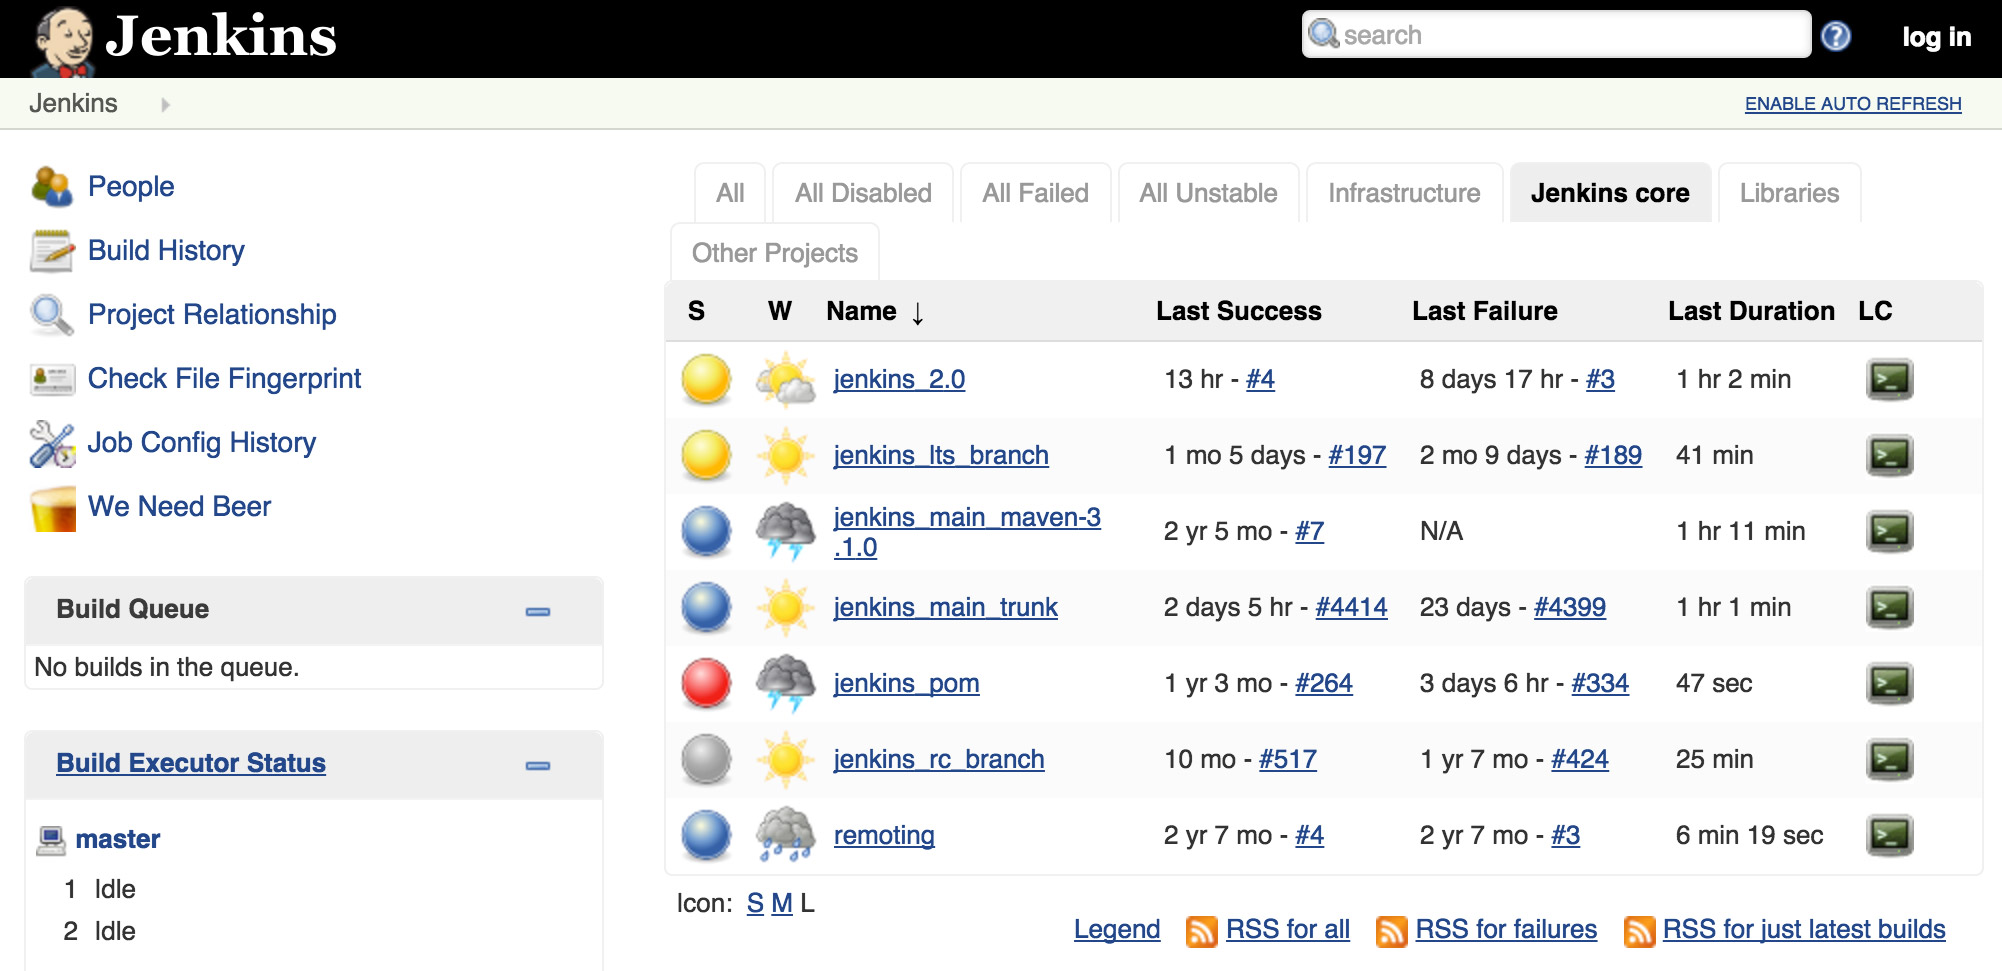 Jenkins interface one of the most popular CI/CD Test Automation Tools